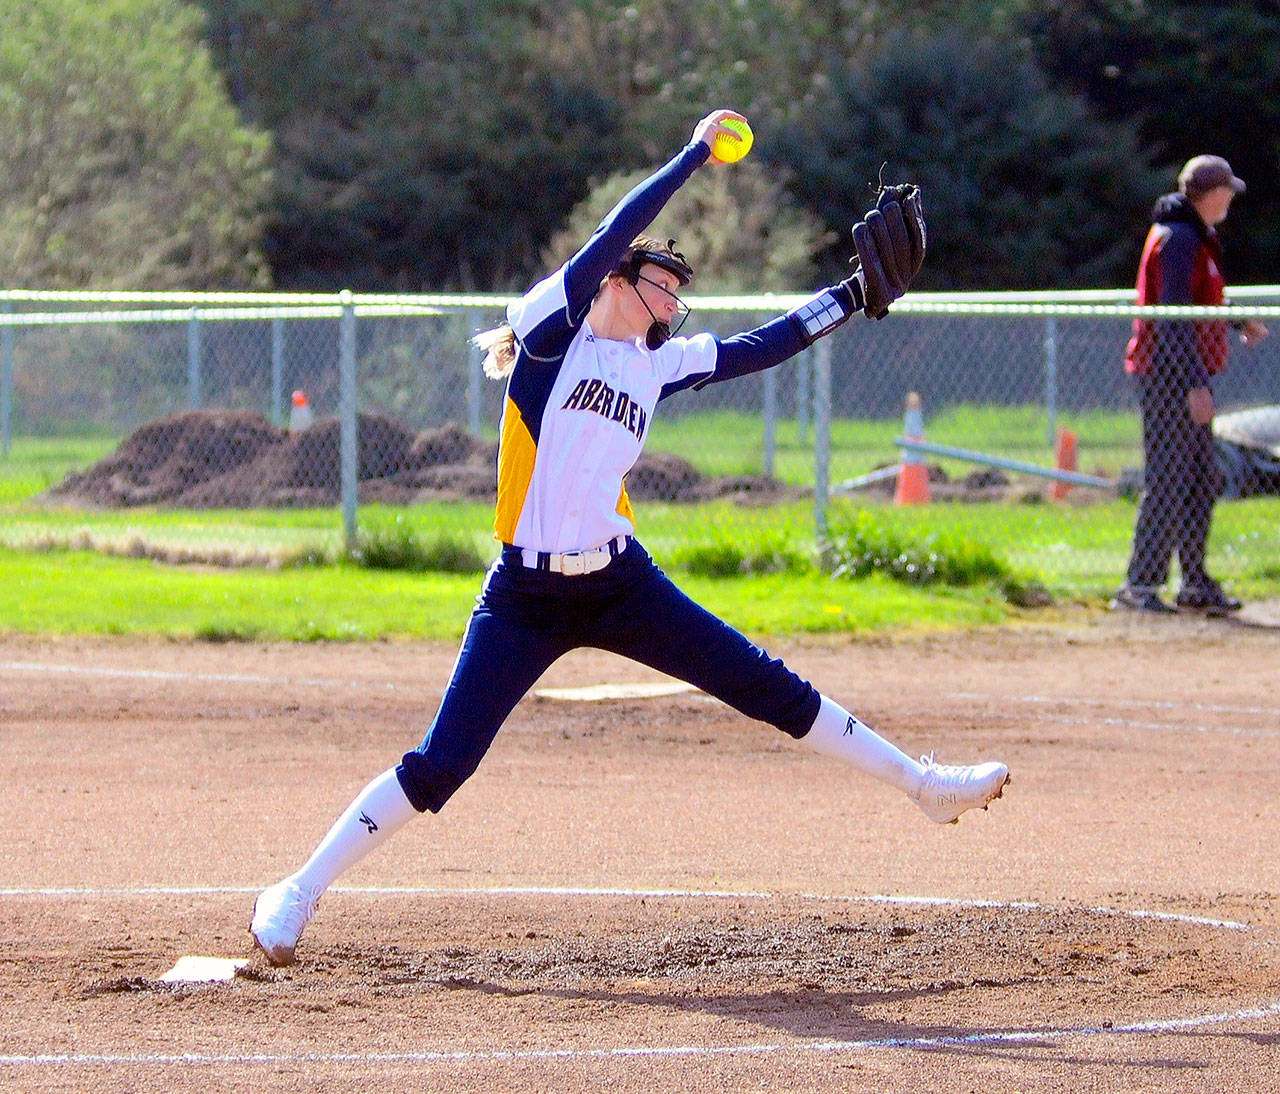 Aberdeen’s Jalyn McDaniel delivers a pitch in the second inning against WF West. McDaniel surrendered two runs in the Bobcat’s 2-0 loss to WF West on Tuesday at Bishop Field. (Hasani Grayson | Grays Harbor News Group)